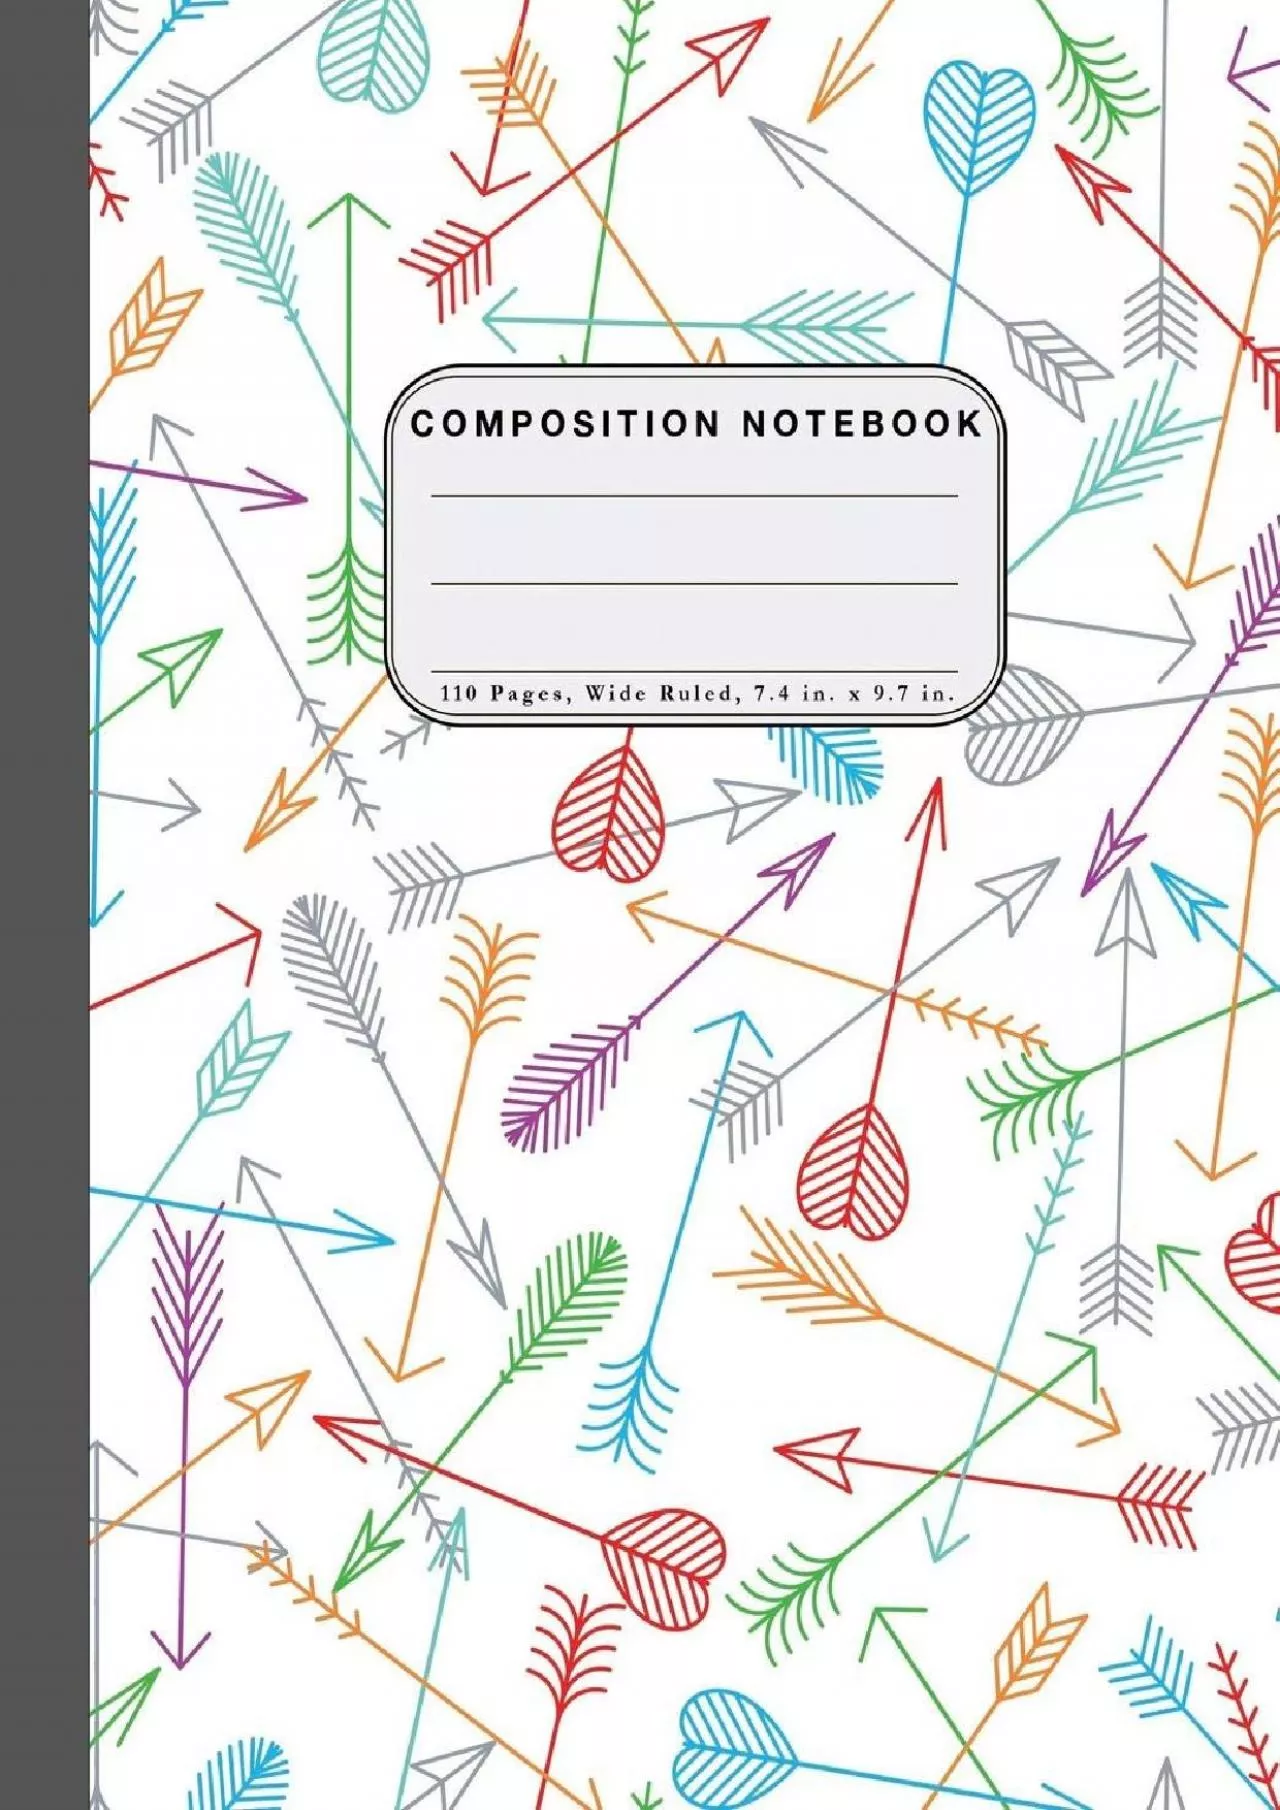 [DOWNLOAD] Wide Ruled Composition Notebook: Wide Rule Notebook and 110 Wide Ruled Pages